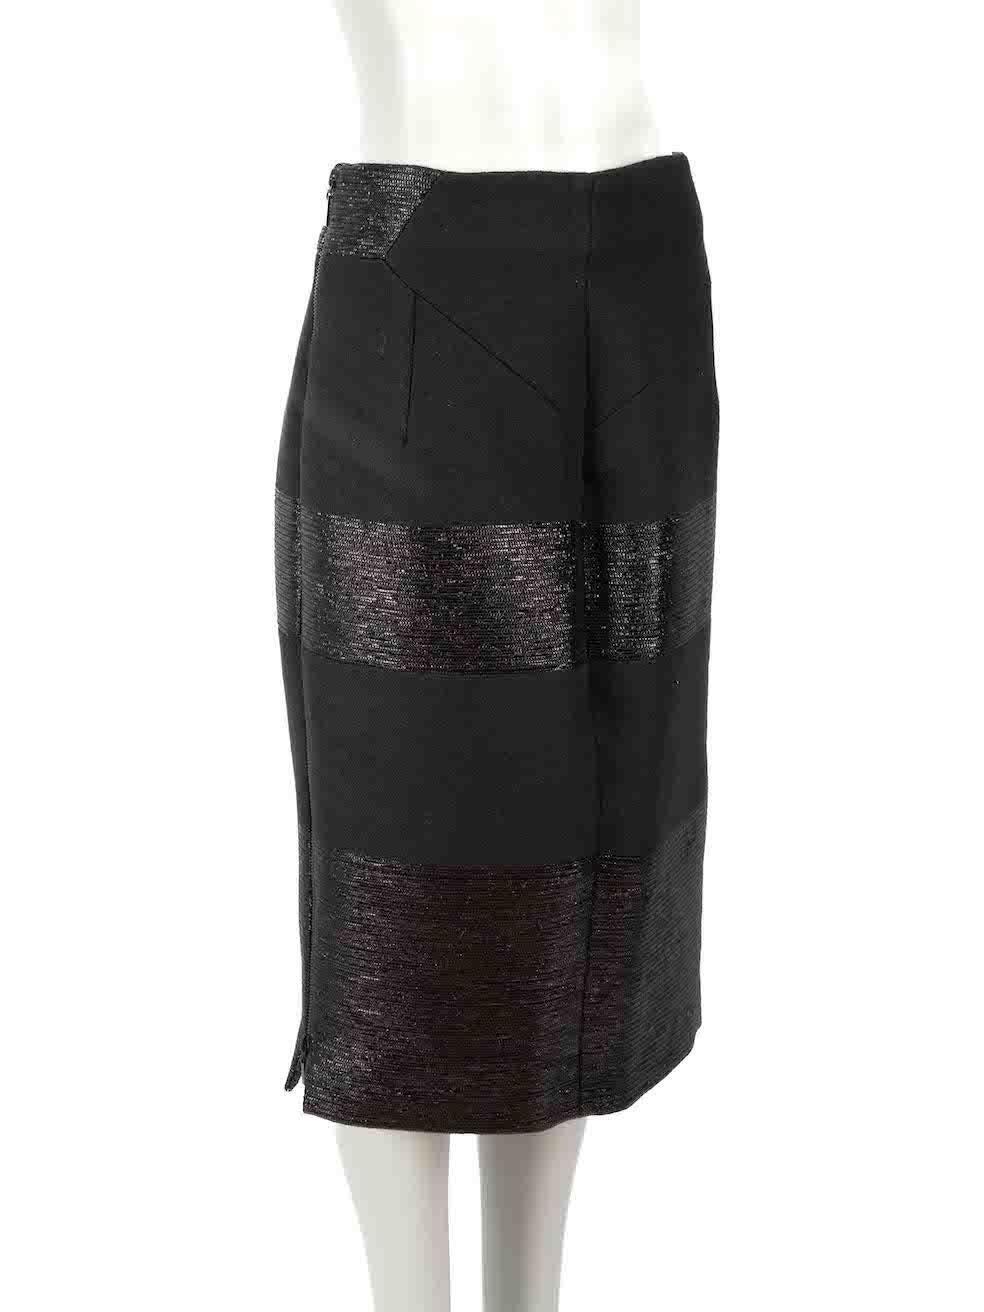 CONDITION is Good. Minor wear to skirt is evident. Light pulls to overall fabric on this used Amanda Wakeley designer resale item.

Details
Black
Cotton
Pencil skirt
Knee length
Metallic textured panels
Back open ended zip fastening

Made in